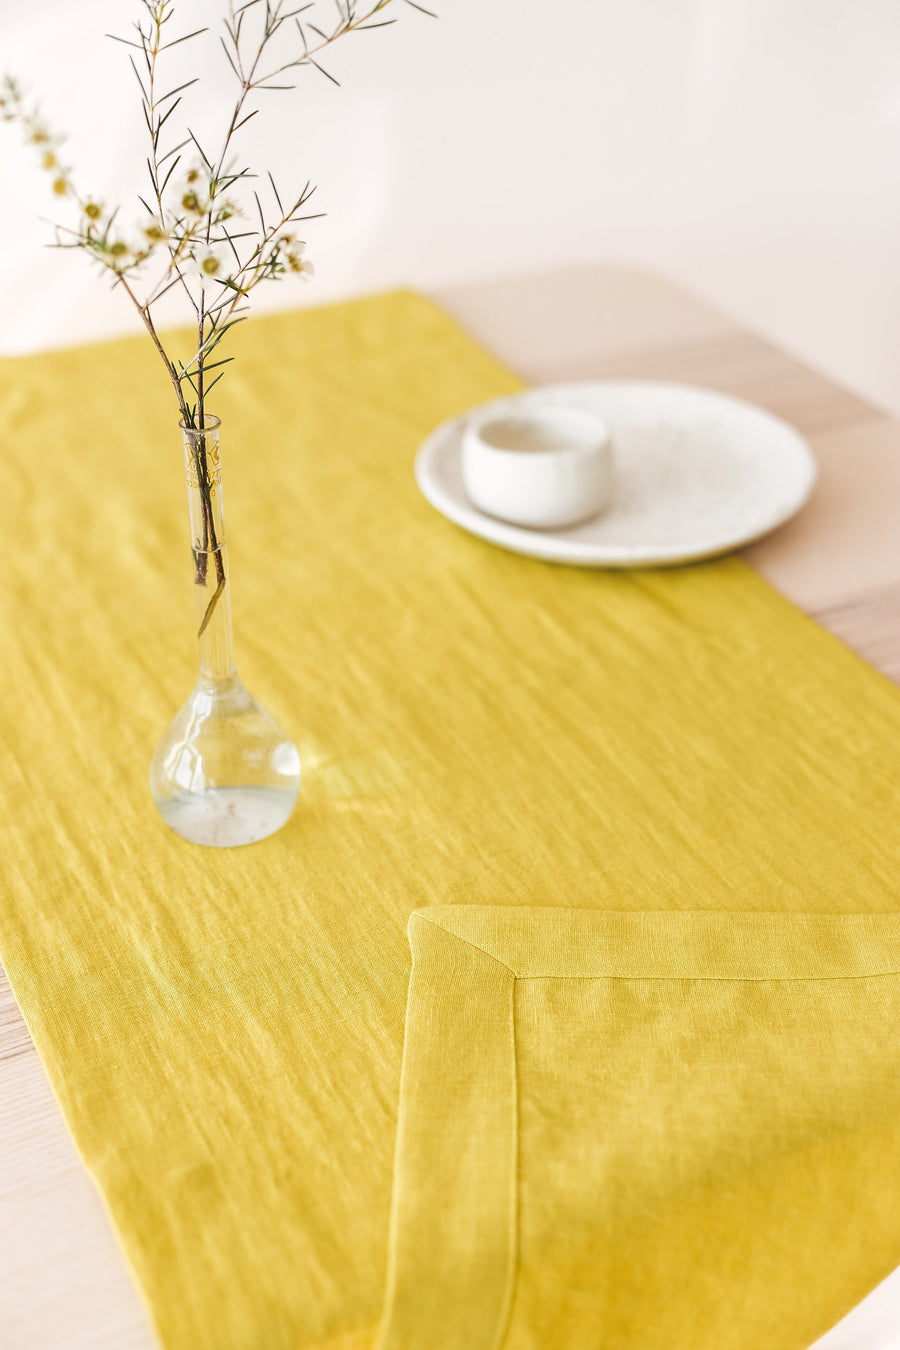 Chartreuse Yellow Table Runner